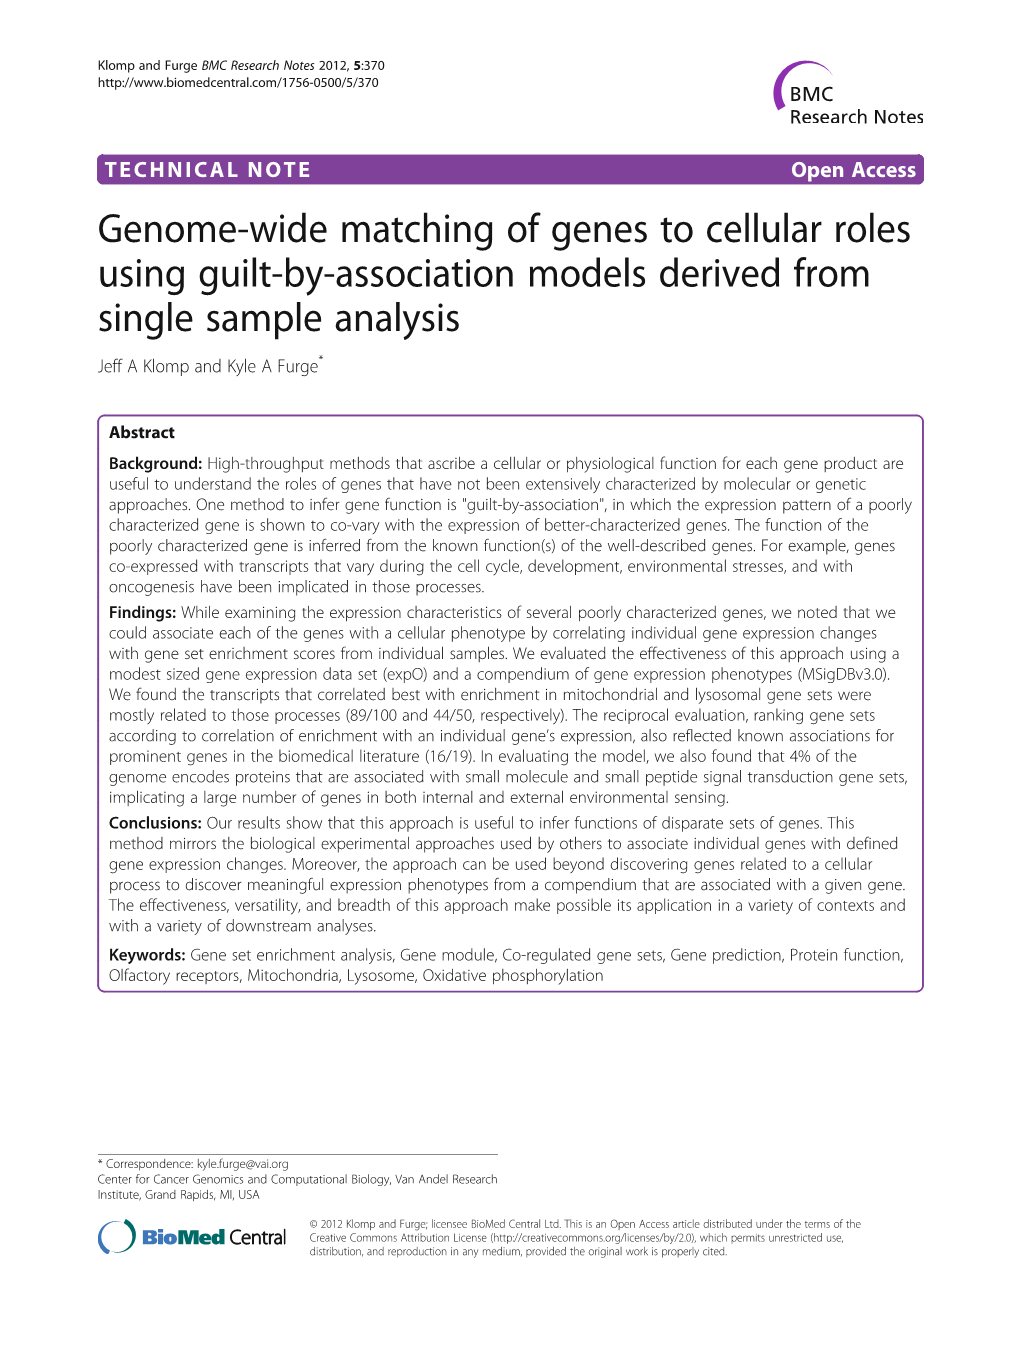 Genome-Wide Matching of Genes to Cellular Roles Using Guilt-By-Association Models Derived from Single Sample Analysis Jeff a Klomp and Kyle a Furge*